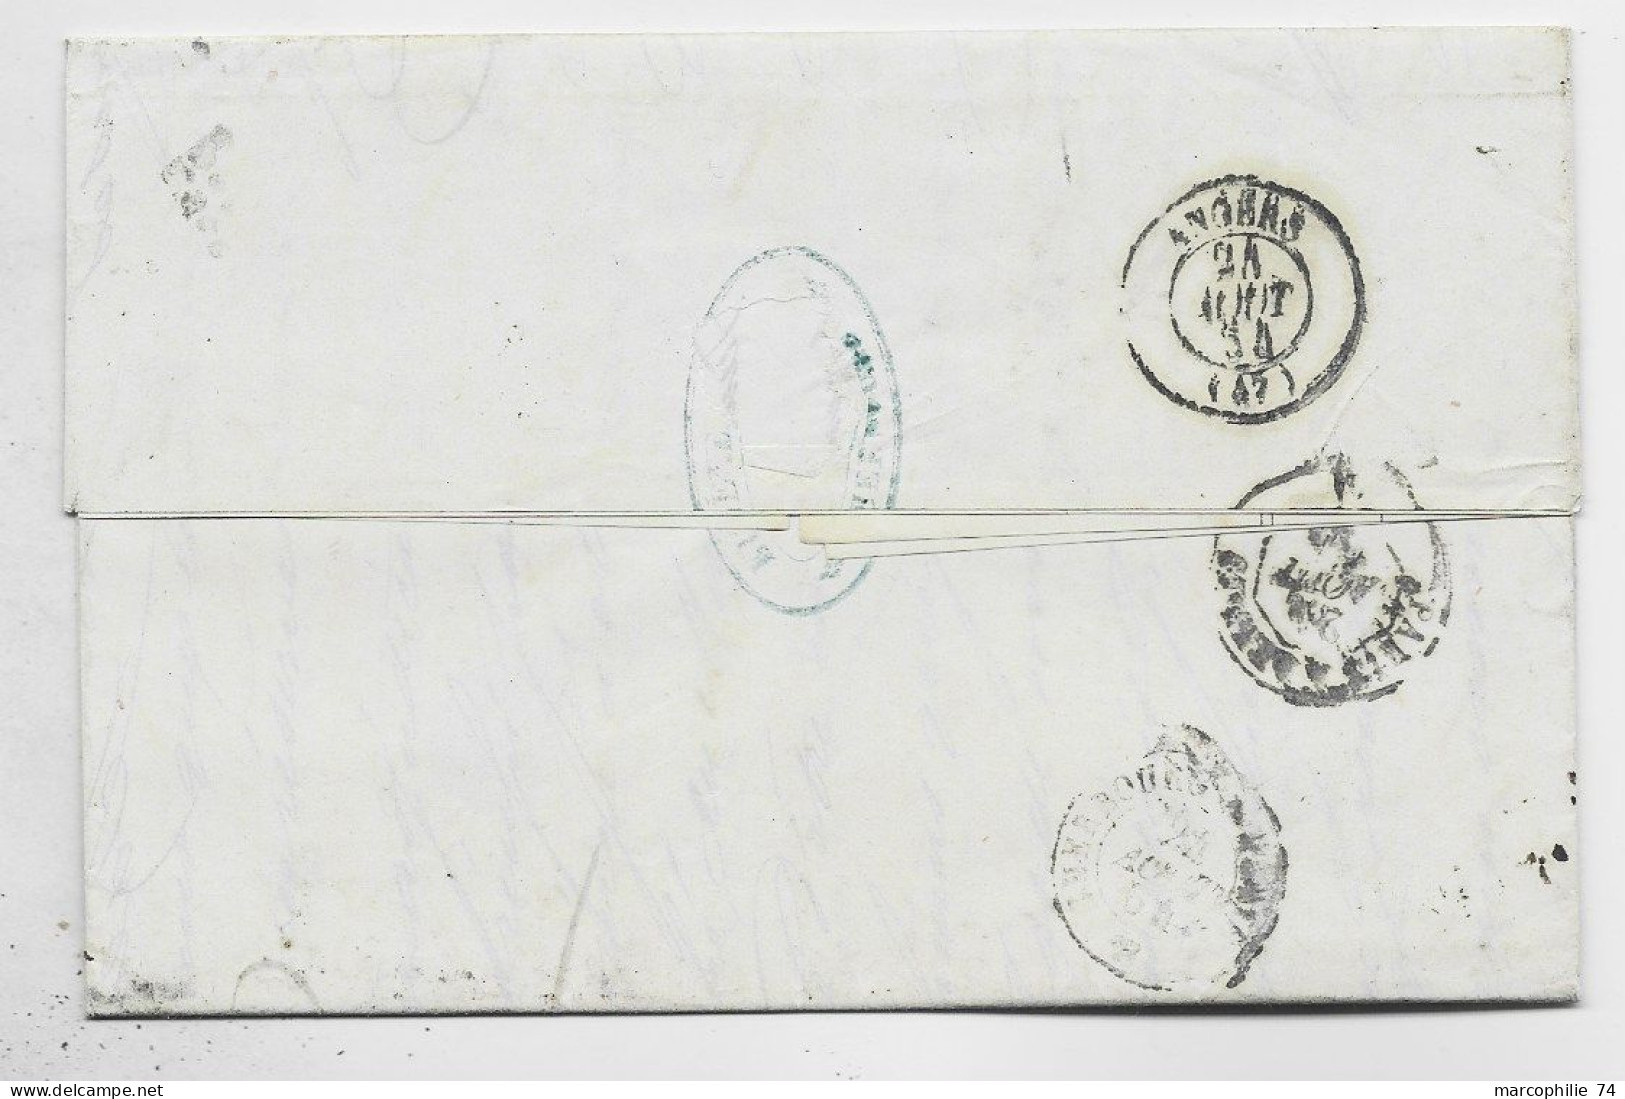 FRANCE N° 23  LOSANGE CHB AMBULANT CHERBOURG A BERNAY 23 AOUT 1864 B LETTRE COVER POUR ANGERS INDICE 14 ++++ - Railway Post